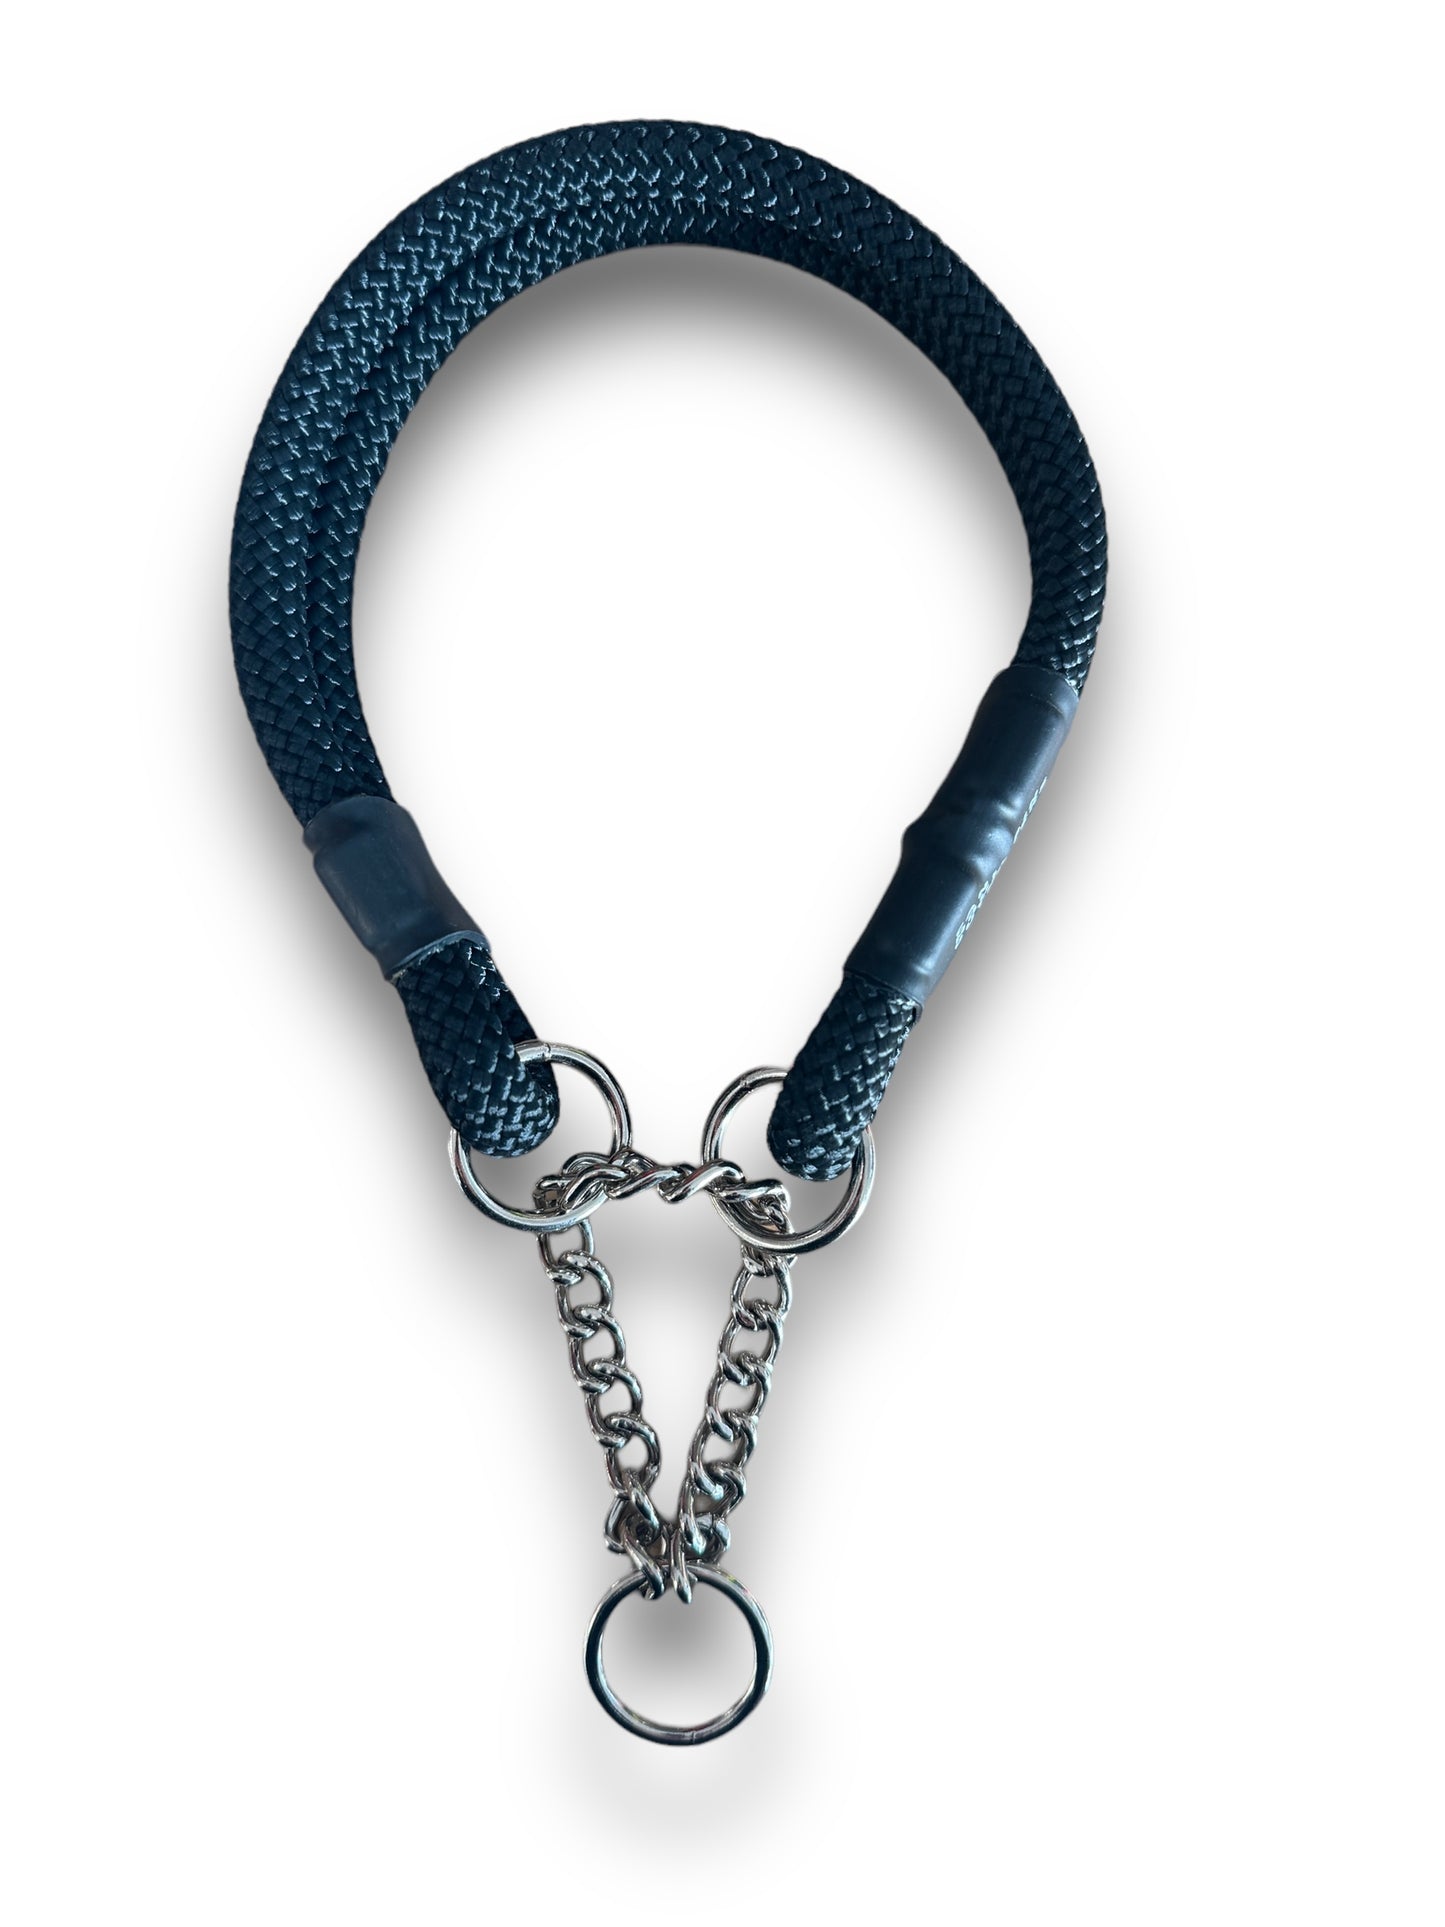 Martingale Rope Collar - Rugged Series - Oasis 9.8mm